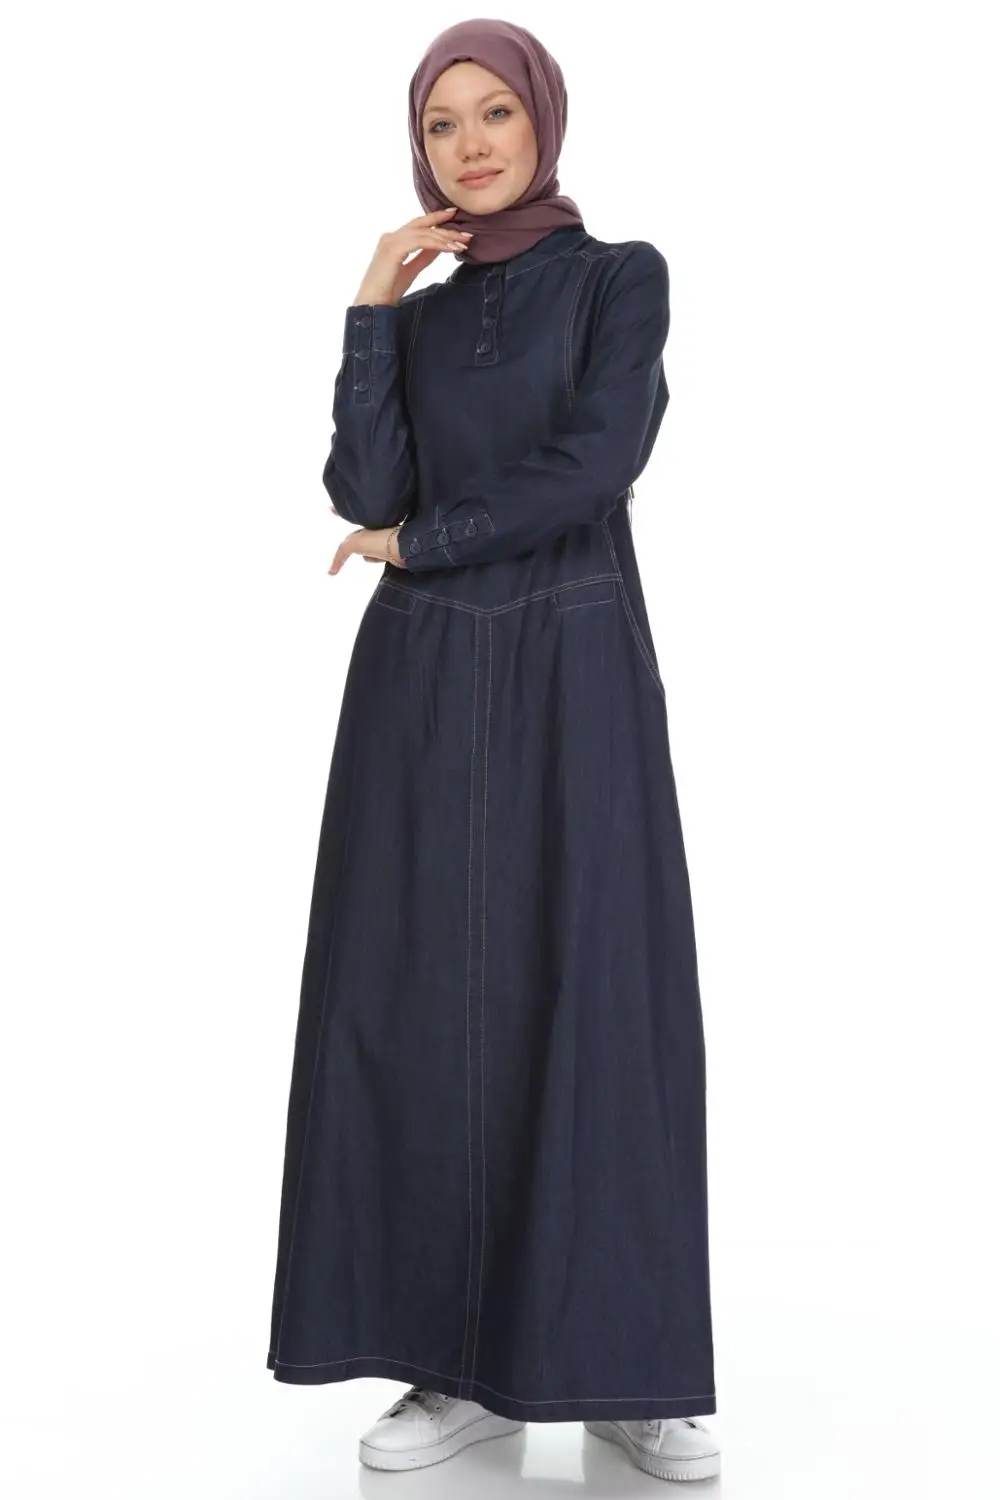 

Islamic Clothing Women Sport Stile Long Dress with Pockets by Denim Fabric from Turkey Abaya Turkish Jeans Wear for Summer